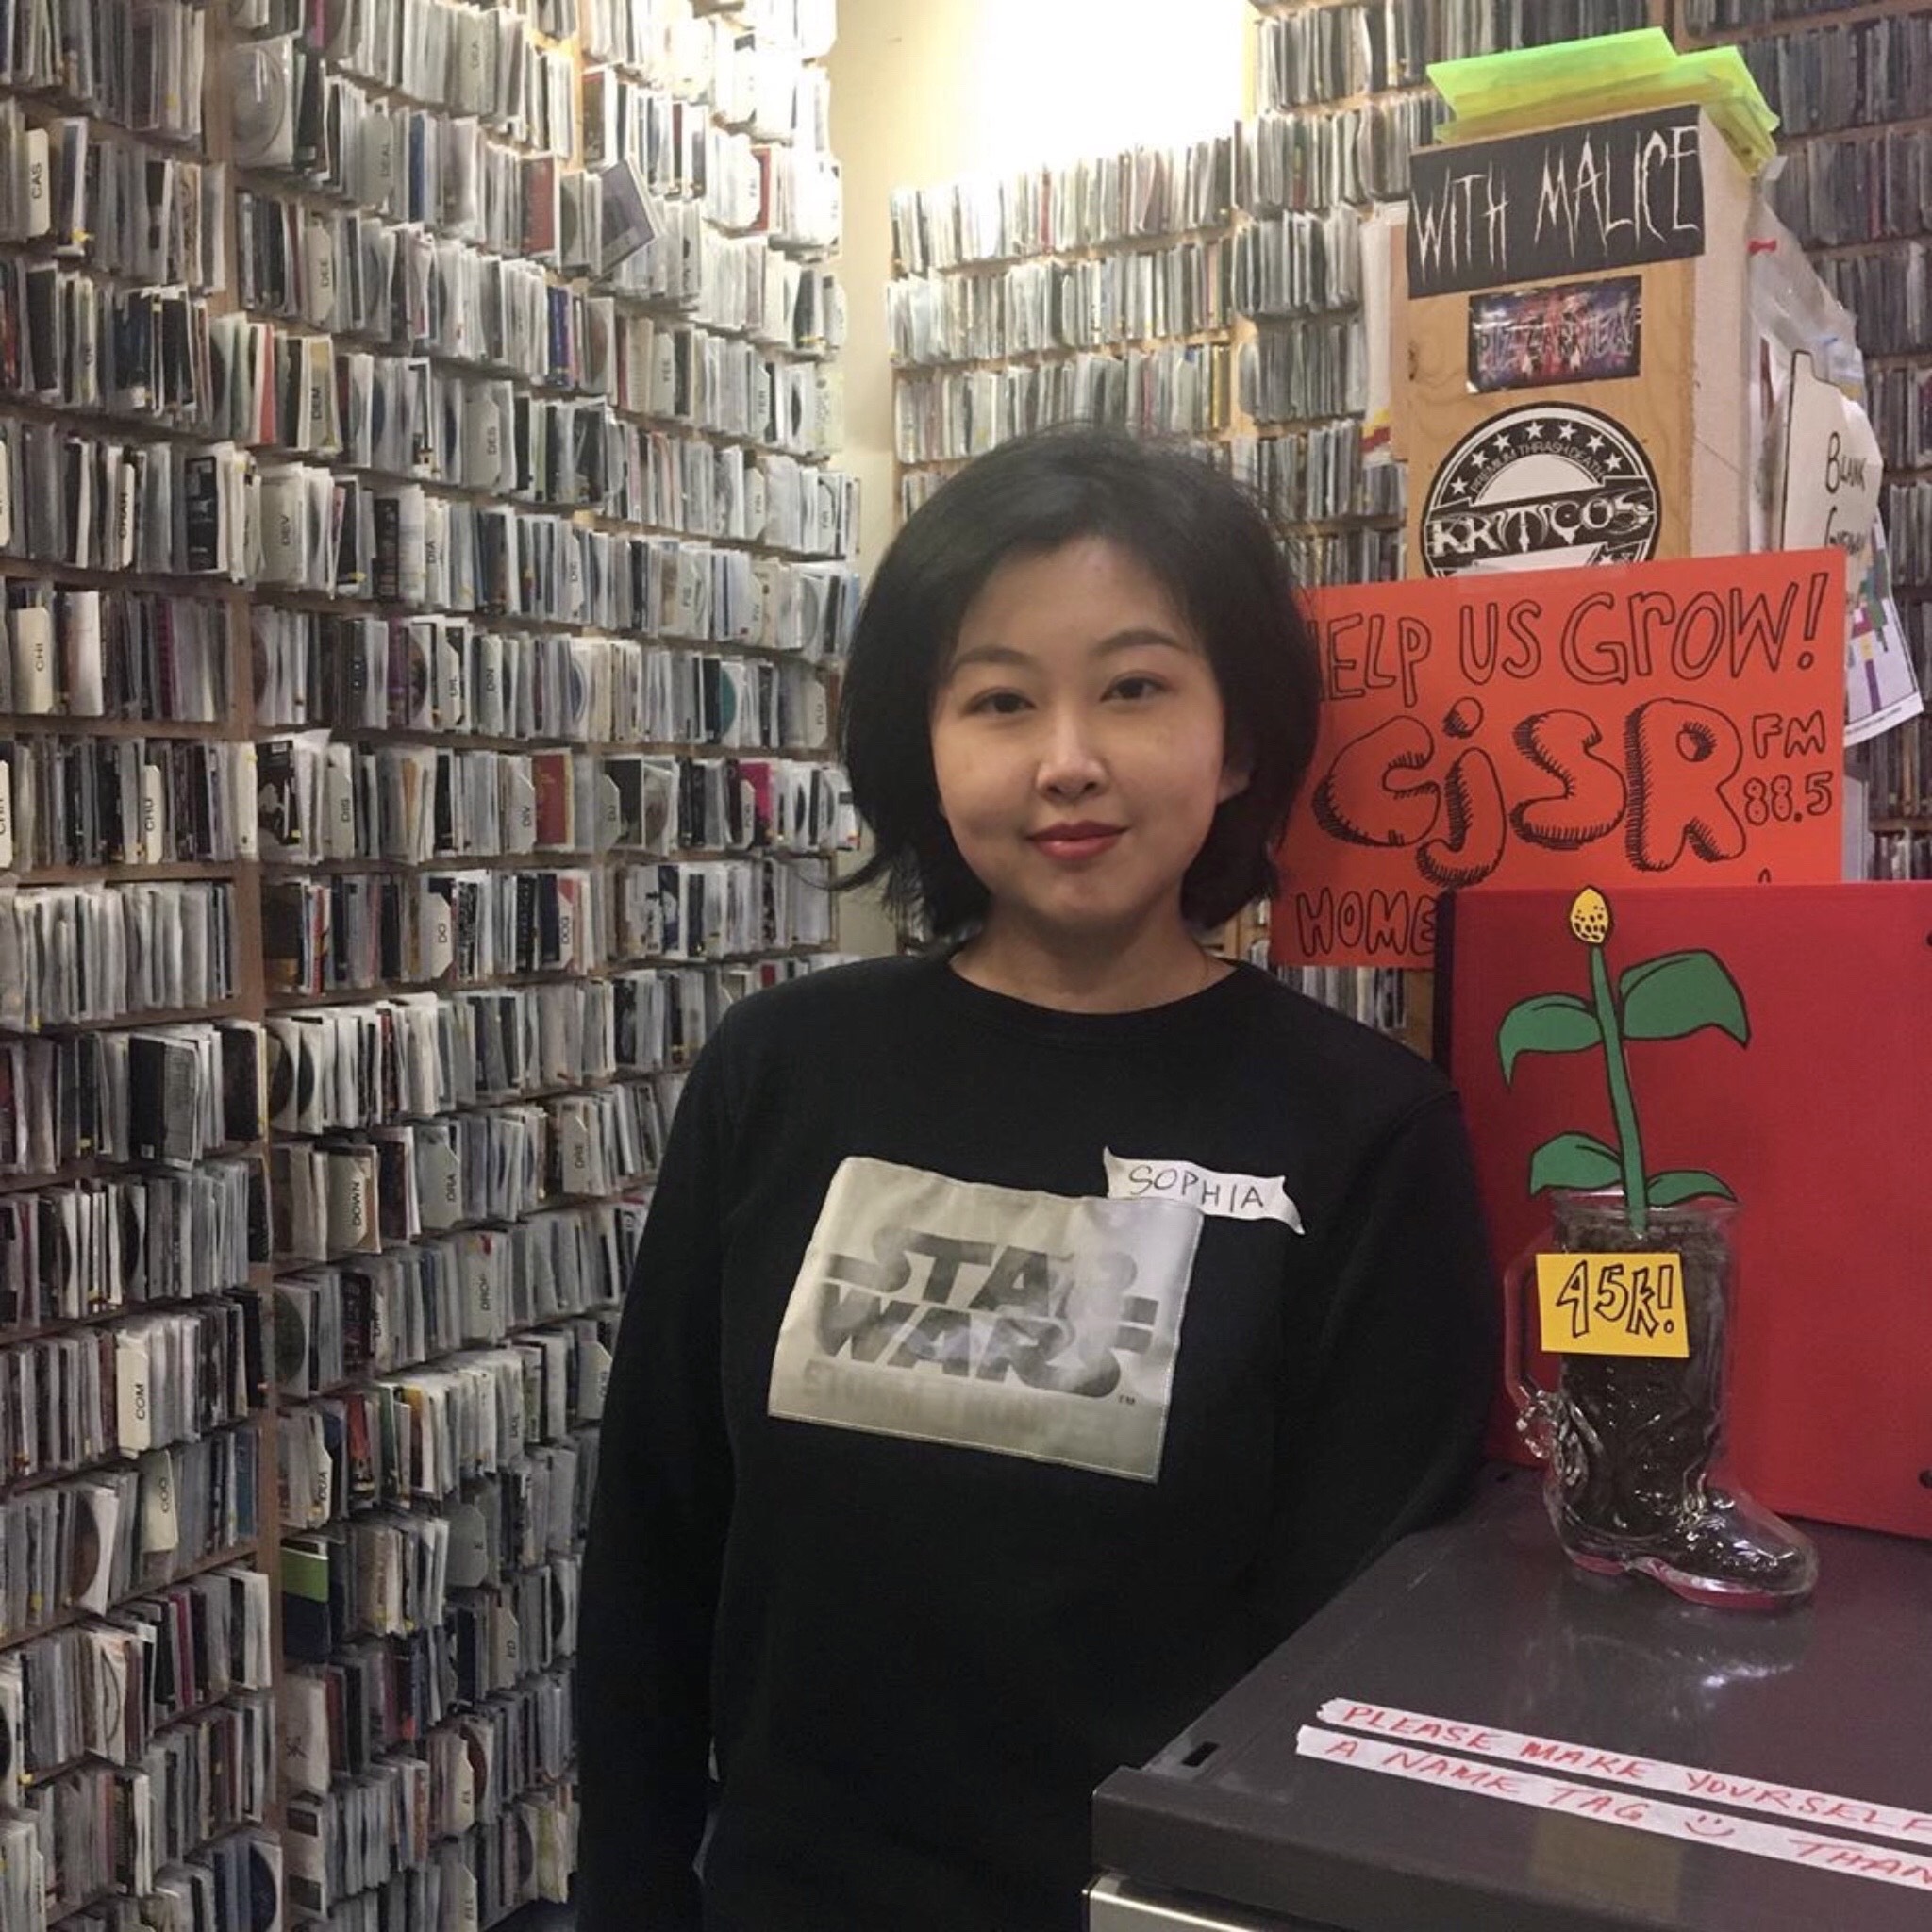 Sophia Yang at CJSR’s station as the podcast intern